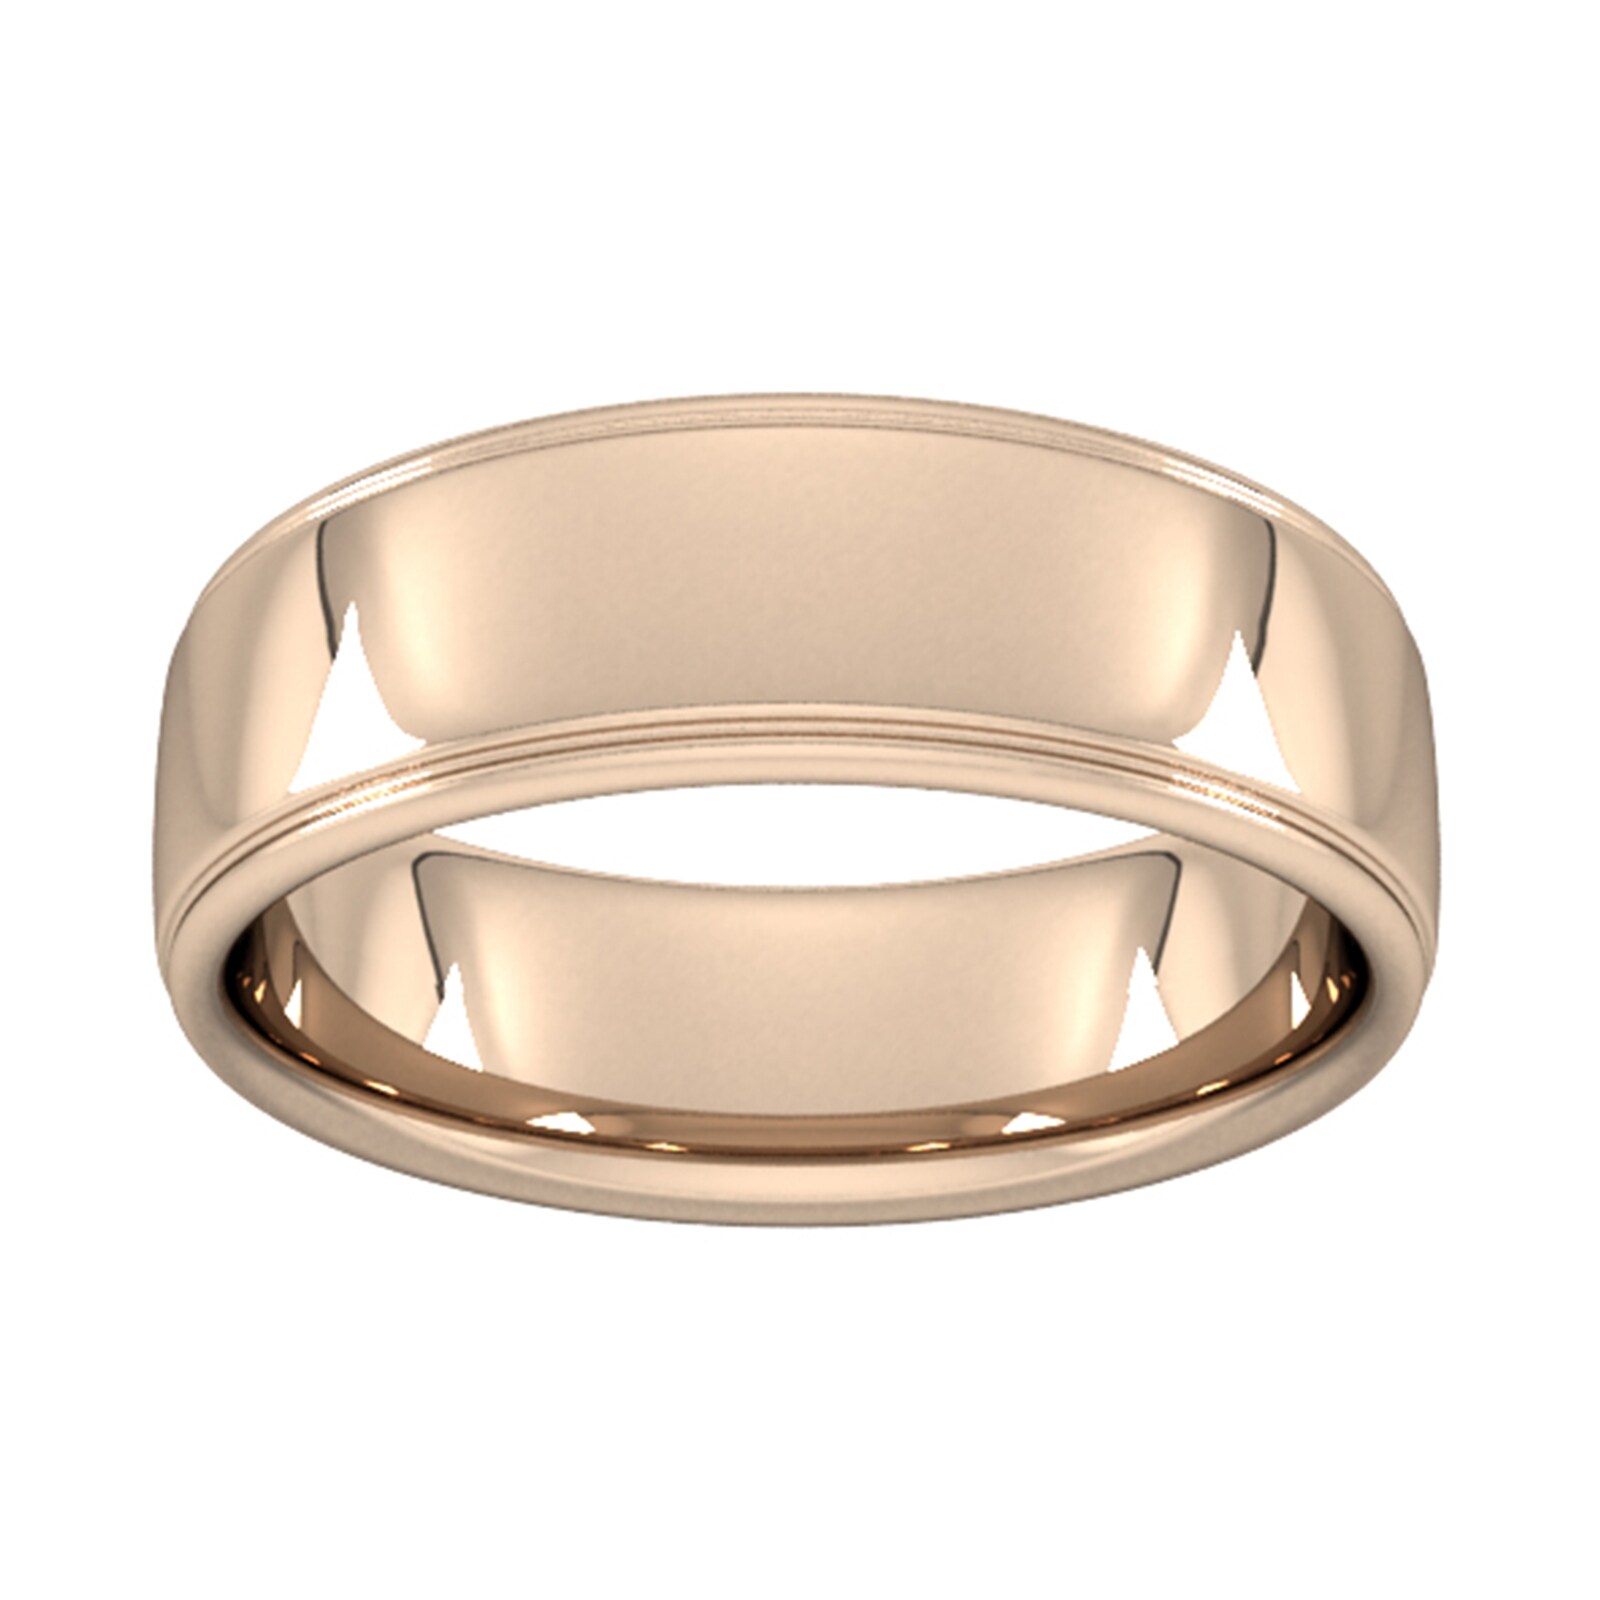 7mm Slight Court Heavy Polished Finish With Grooves Wedding Ring In 18 Carat Rose Gold - Ring Size K